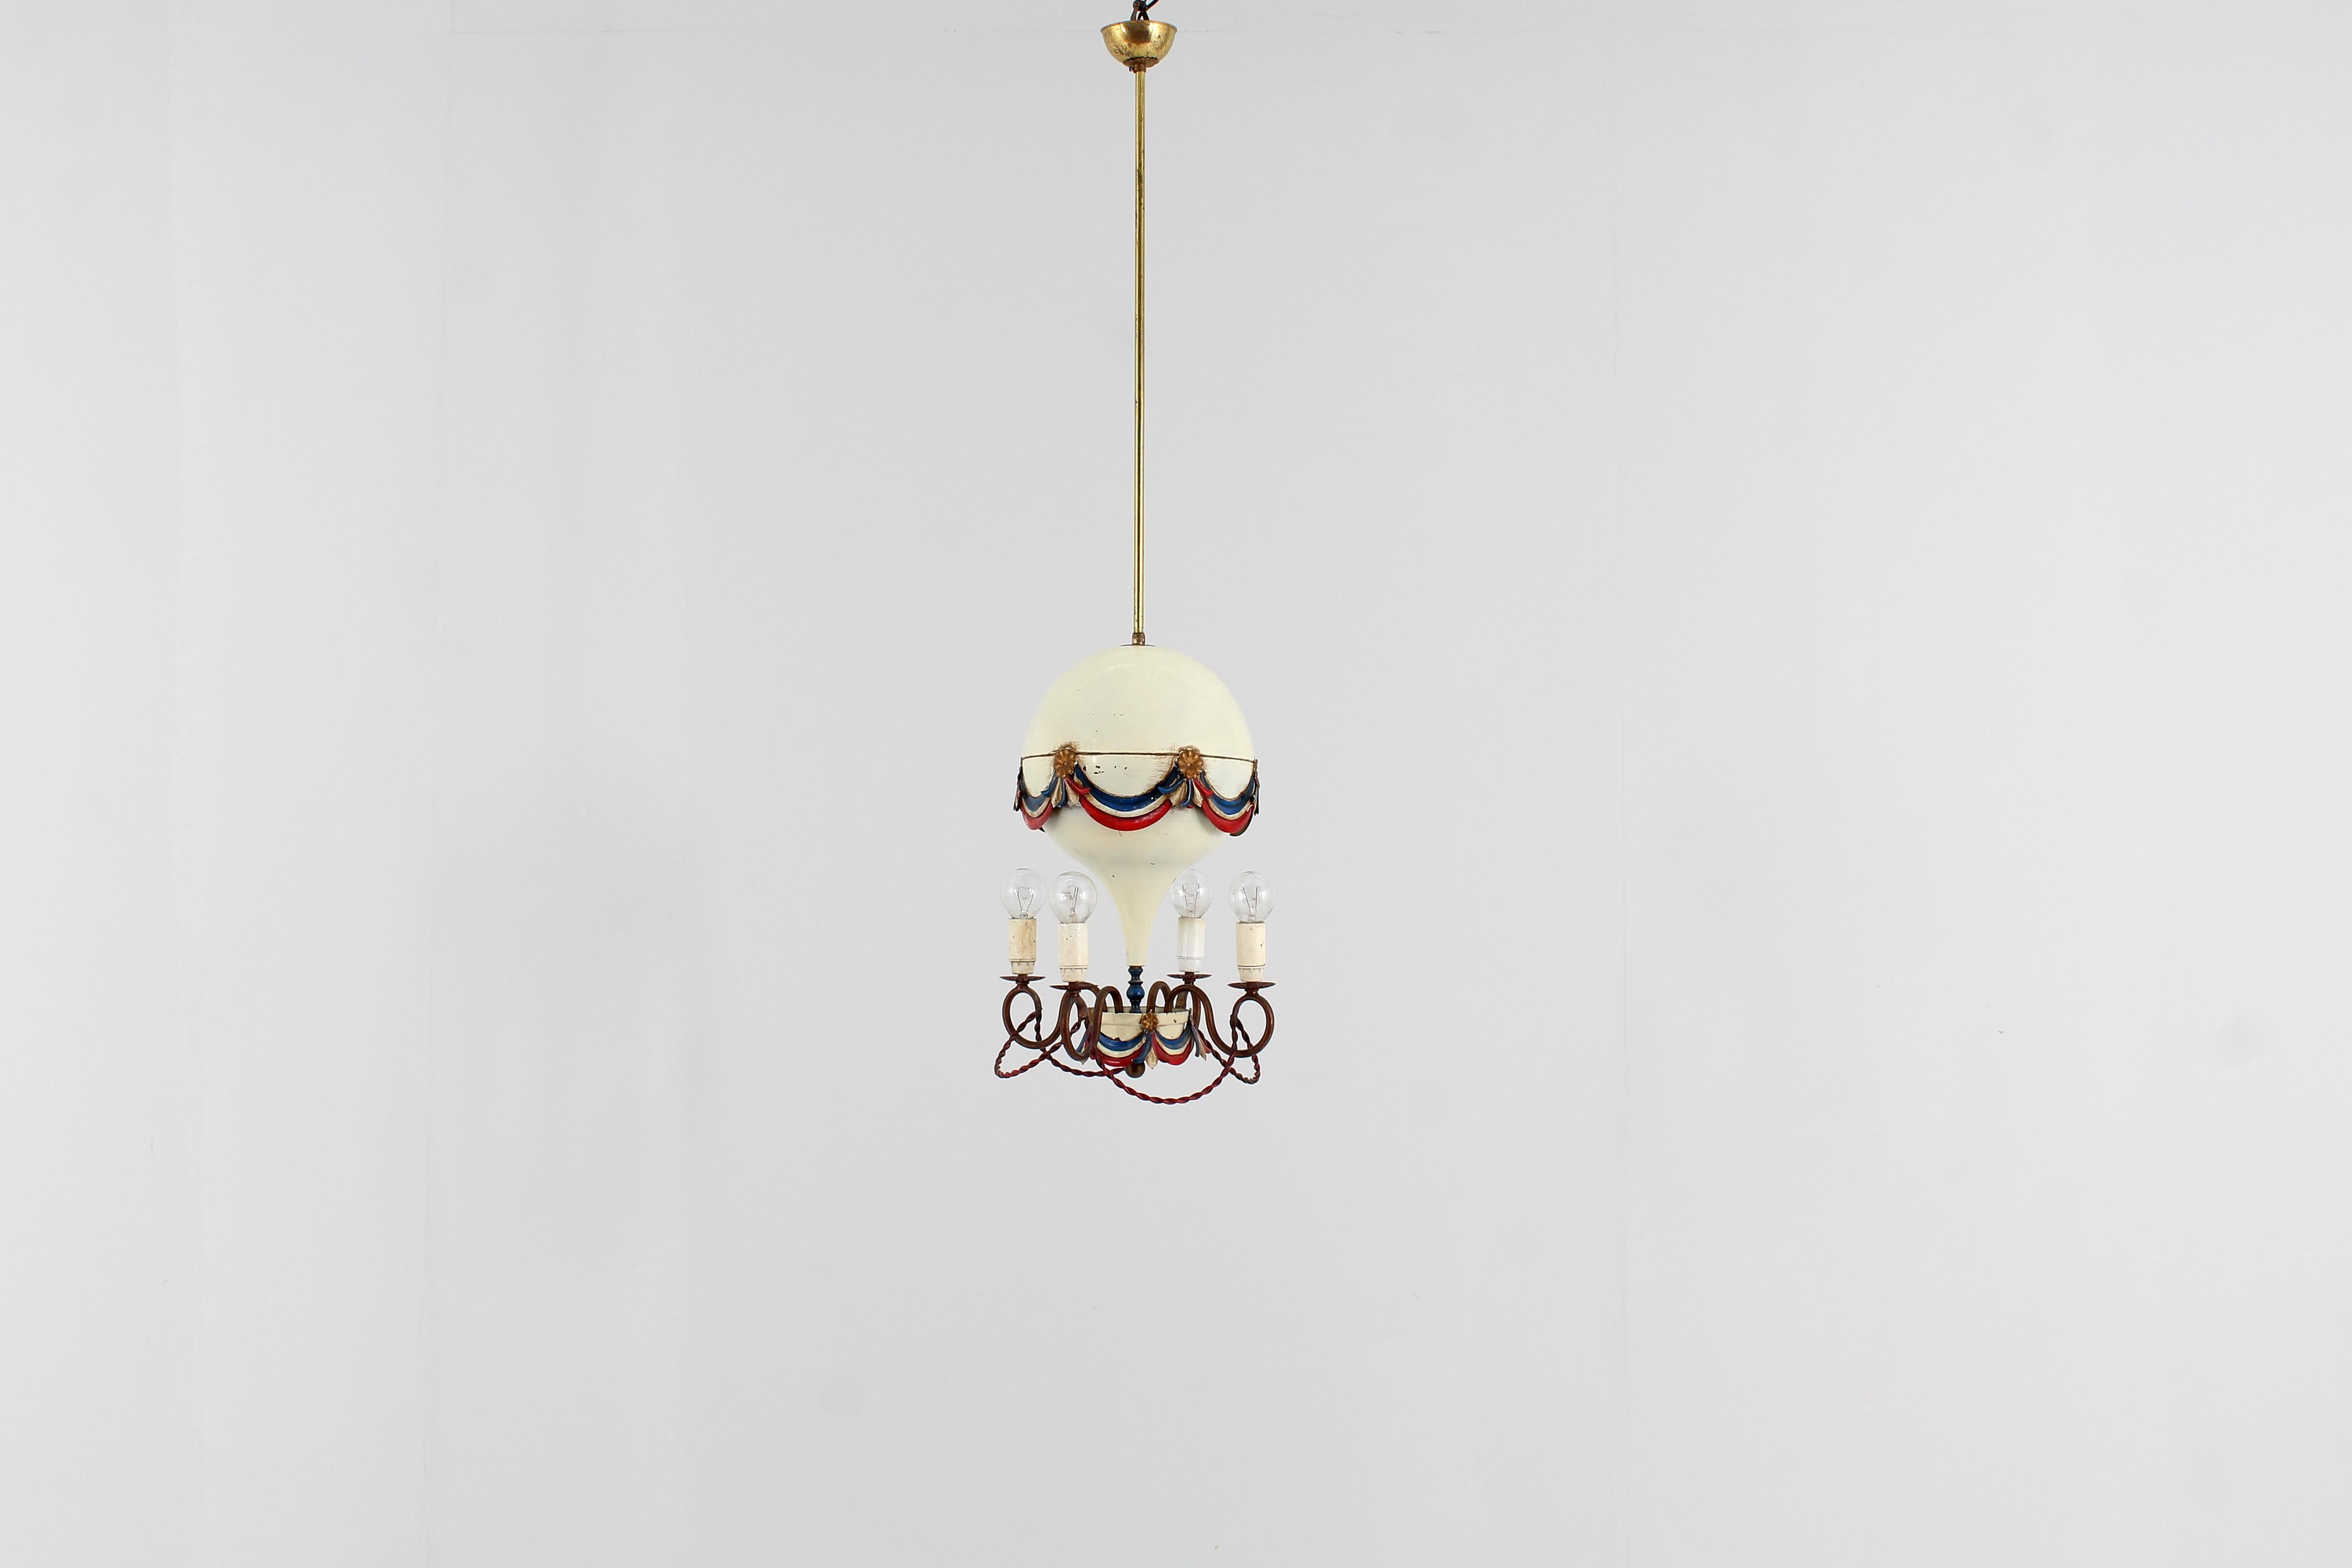 Delicious ceiling lamp ishaped of a hot air balloon. The main body (air balloon) is metal with original hand painted red, white, blue and gold festoons and rosettes
There are four curved brass rod lighting arms, each carrying a single e14 screw